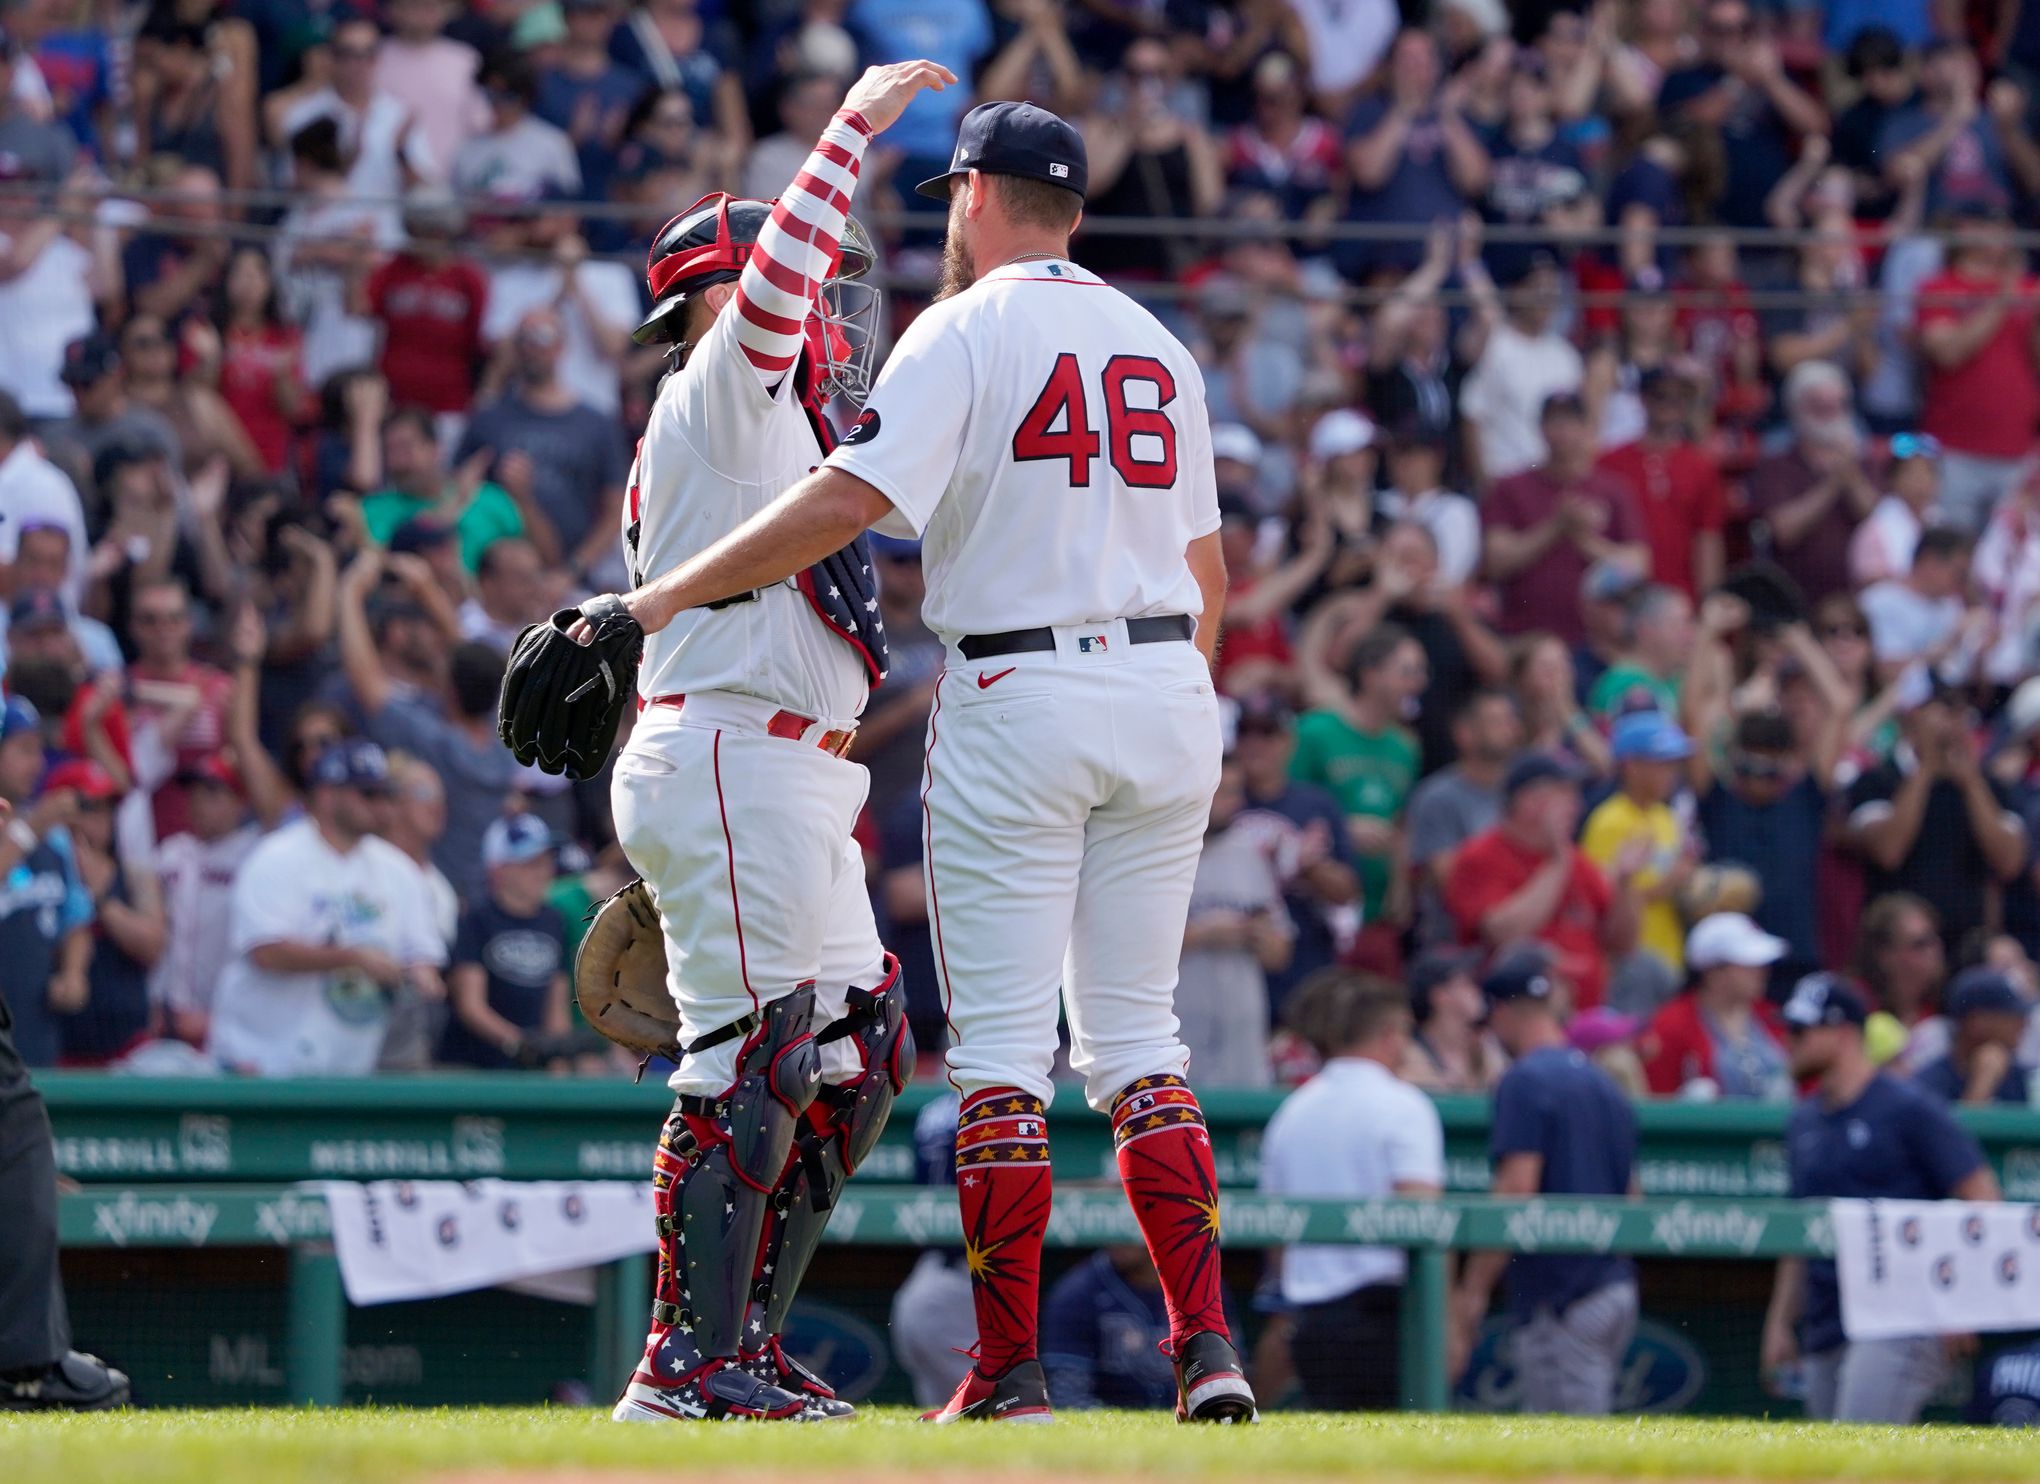 Christian Arroyo scratched from Red Sox lineup due to illness